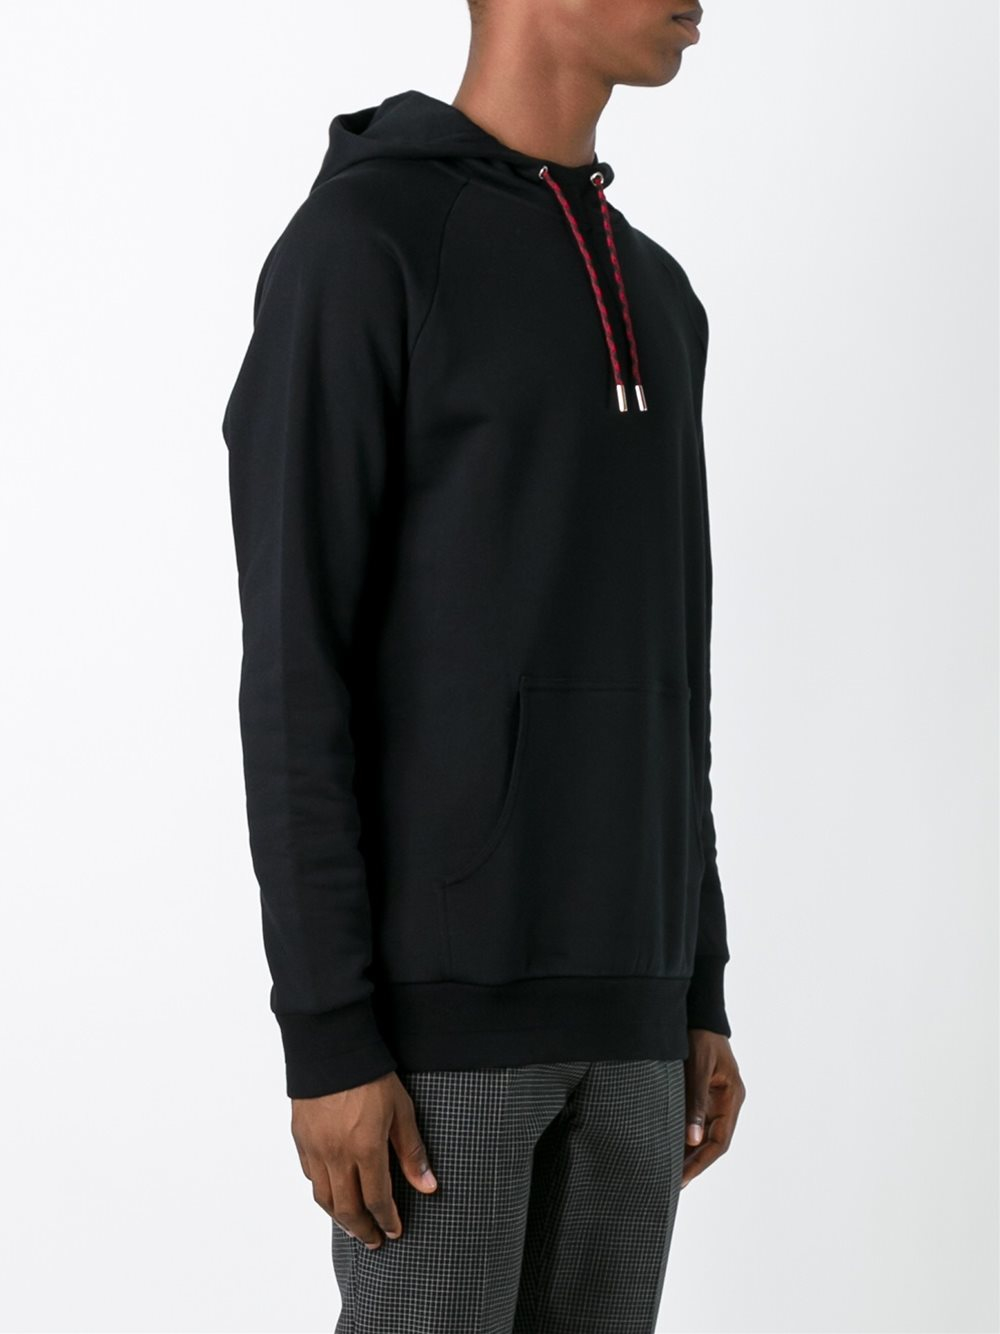 Dior Homme Cotton 'cd' Hoodie in Black for Men - Lyst